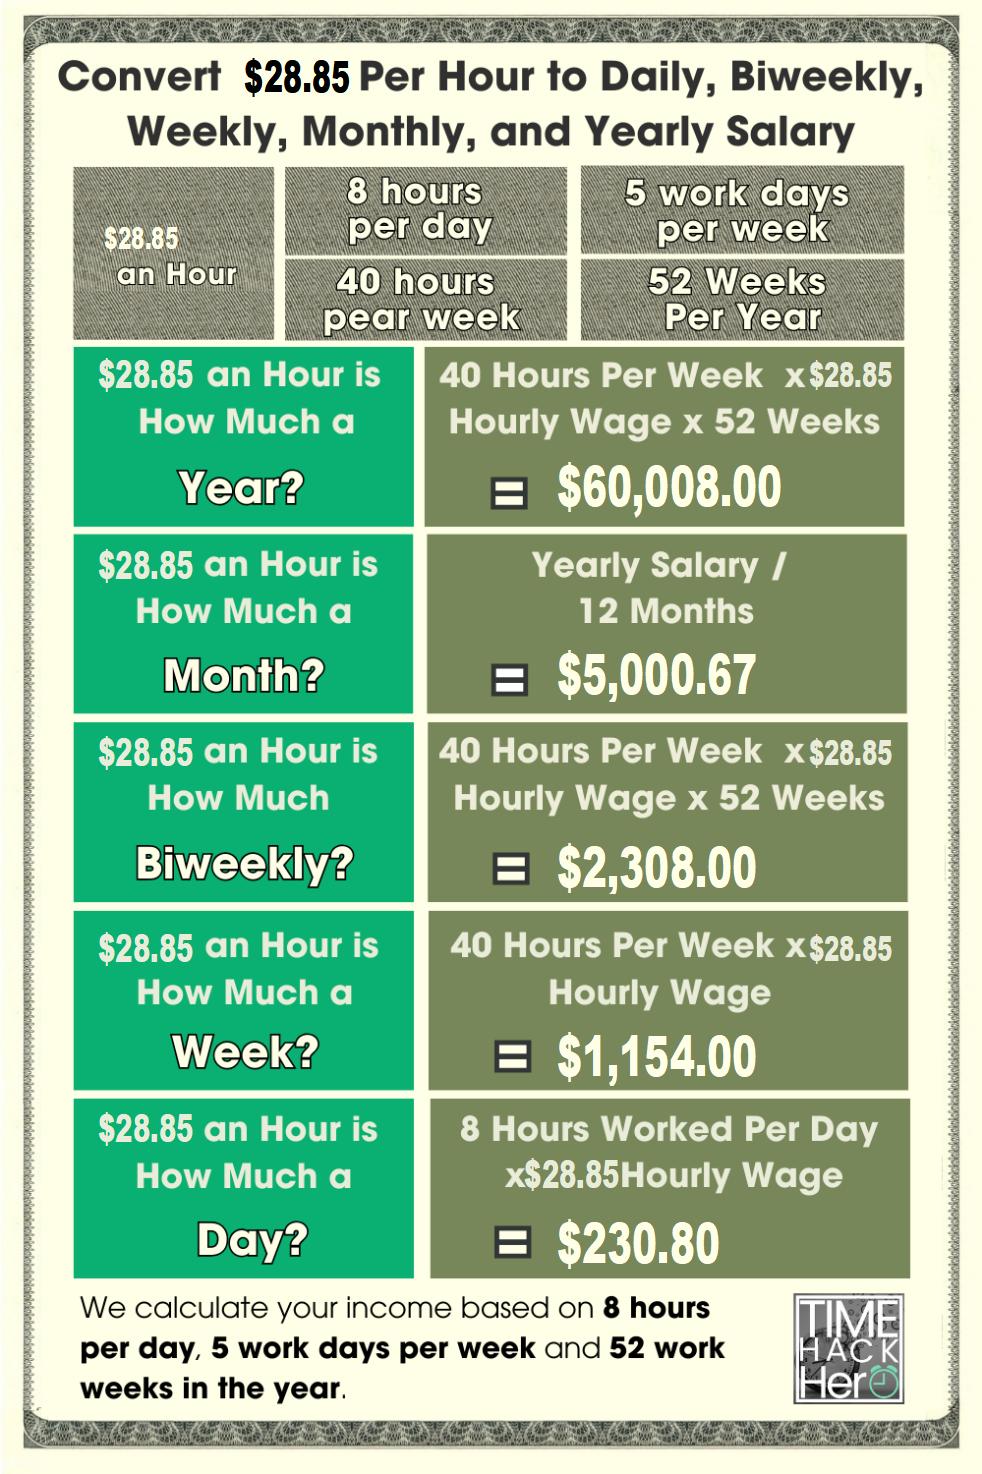 Convert $28.85 Per Hour to Weekly, Monthly, and Yearly Salary